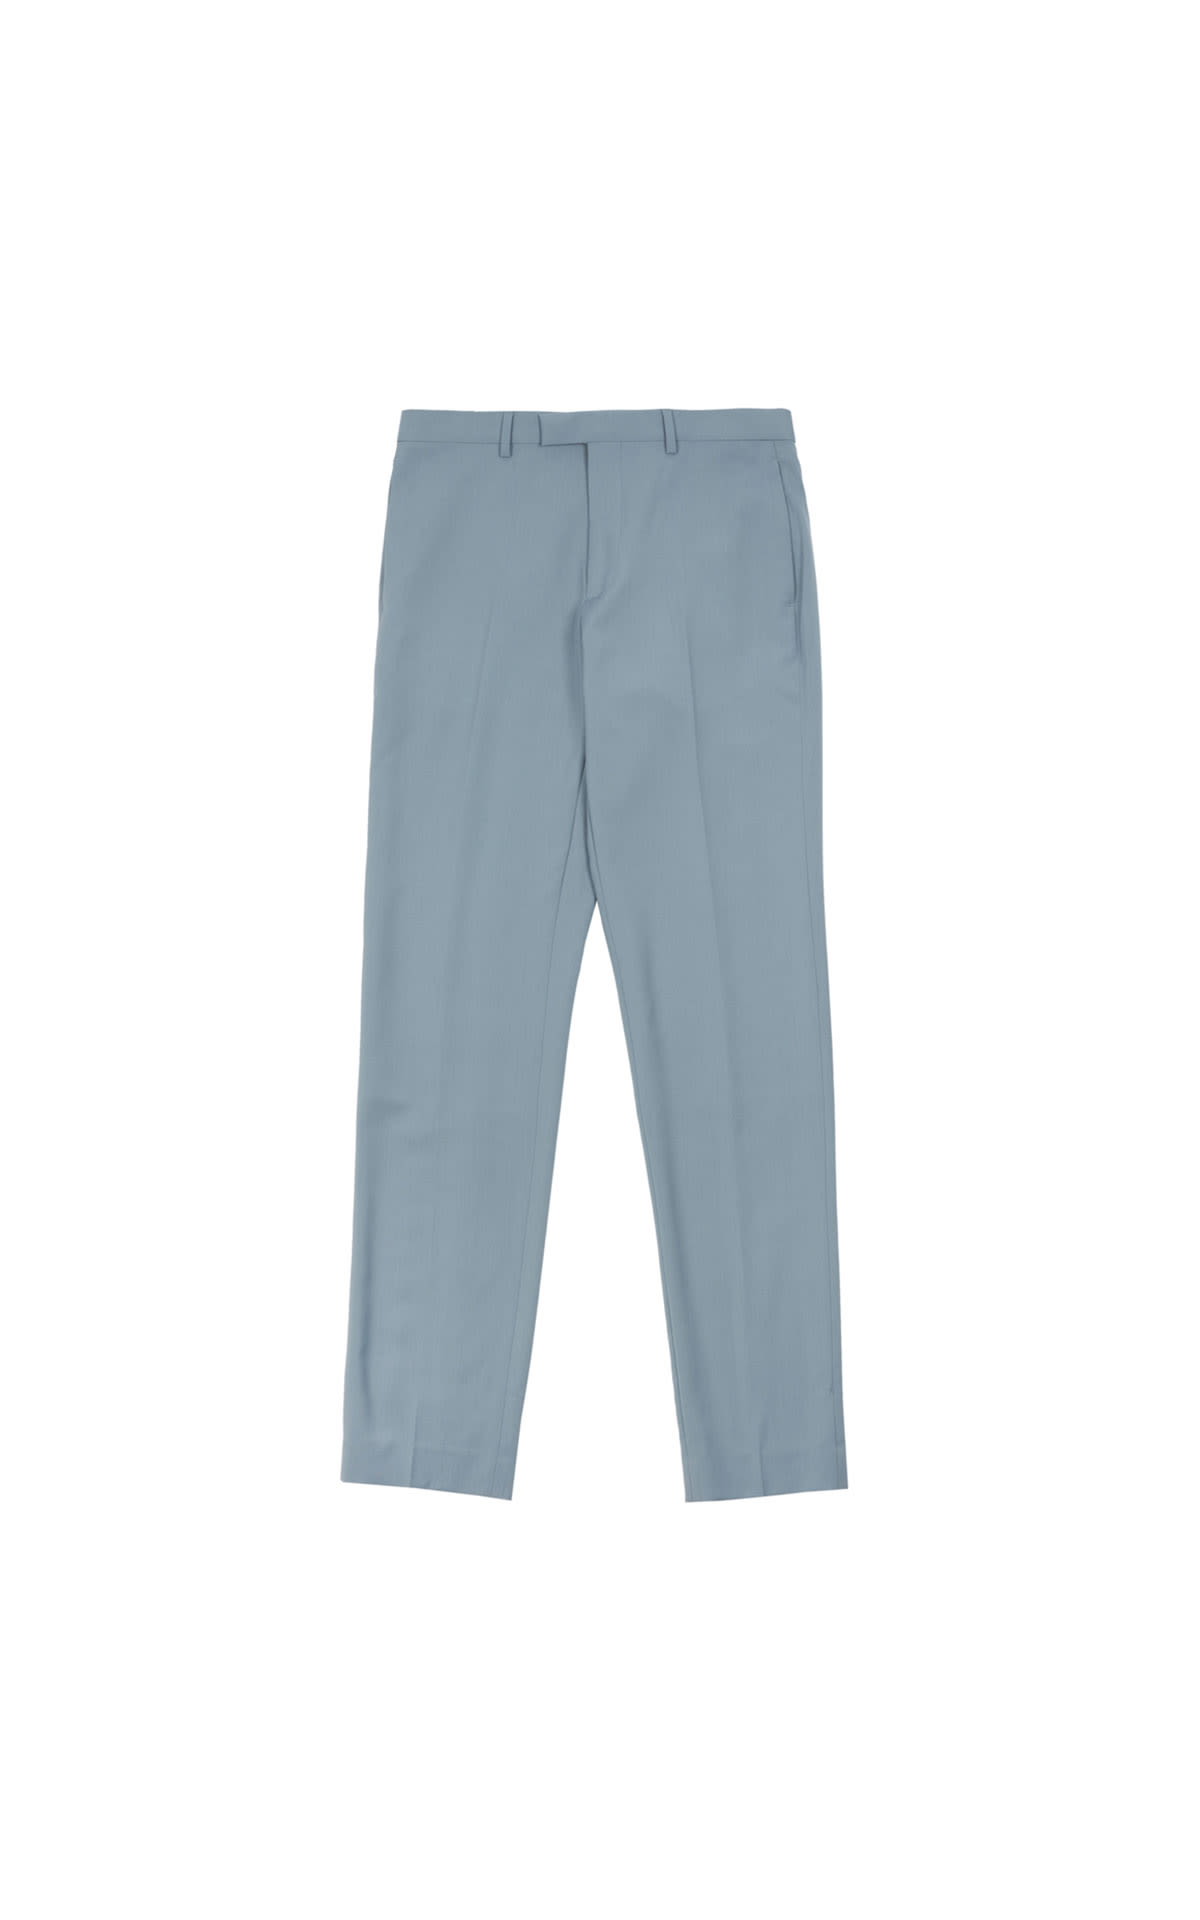 Sandro Formal storm trousers from Bicester Village